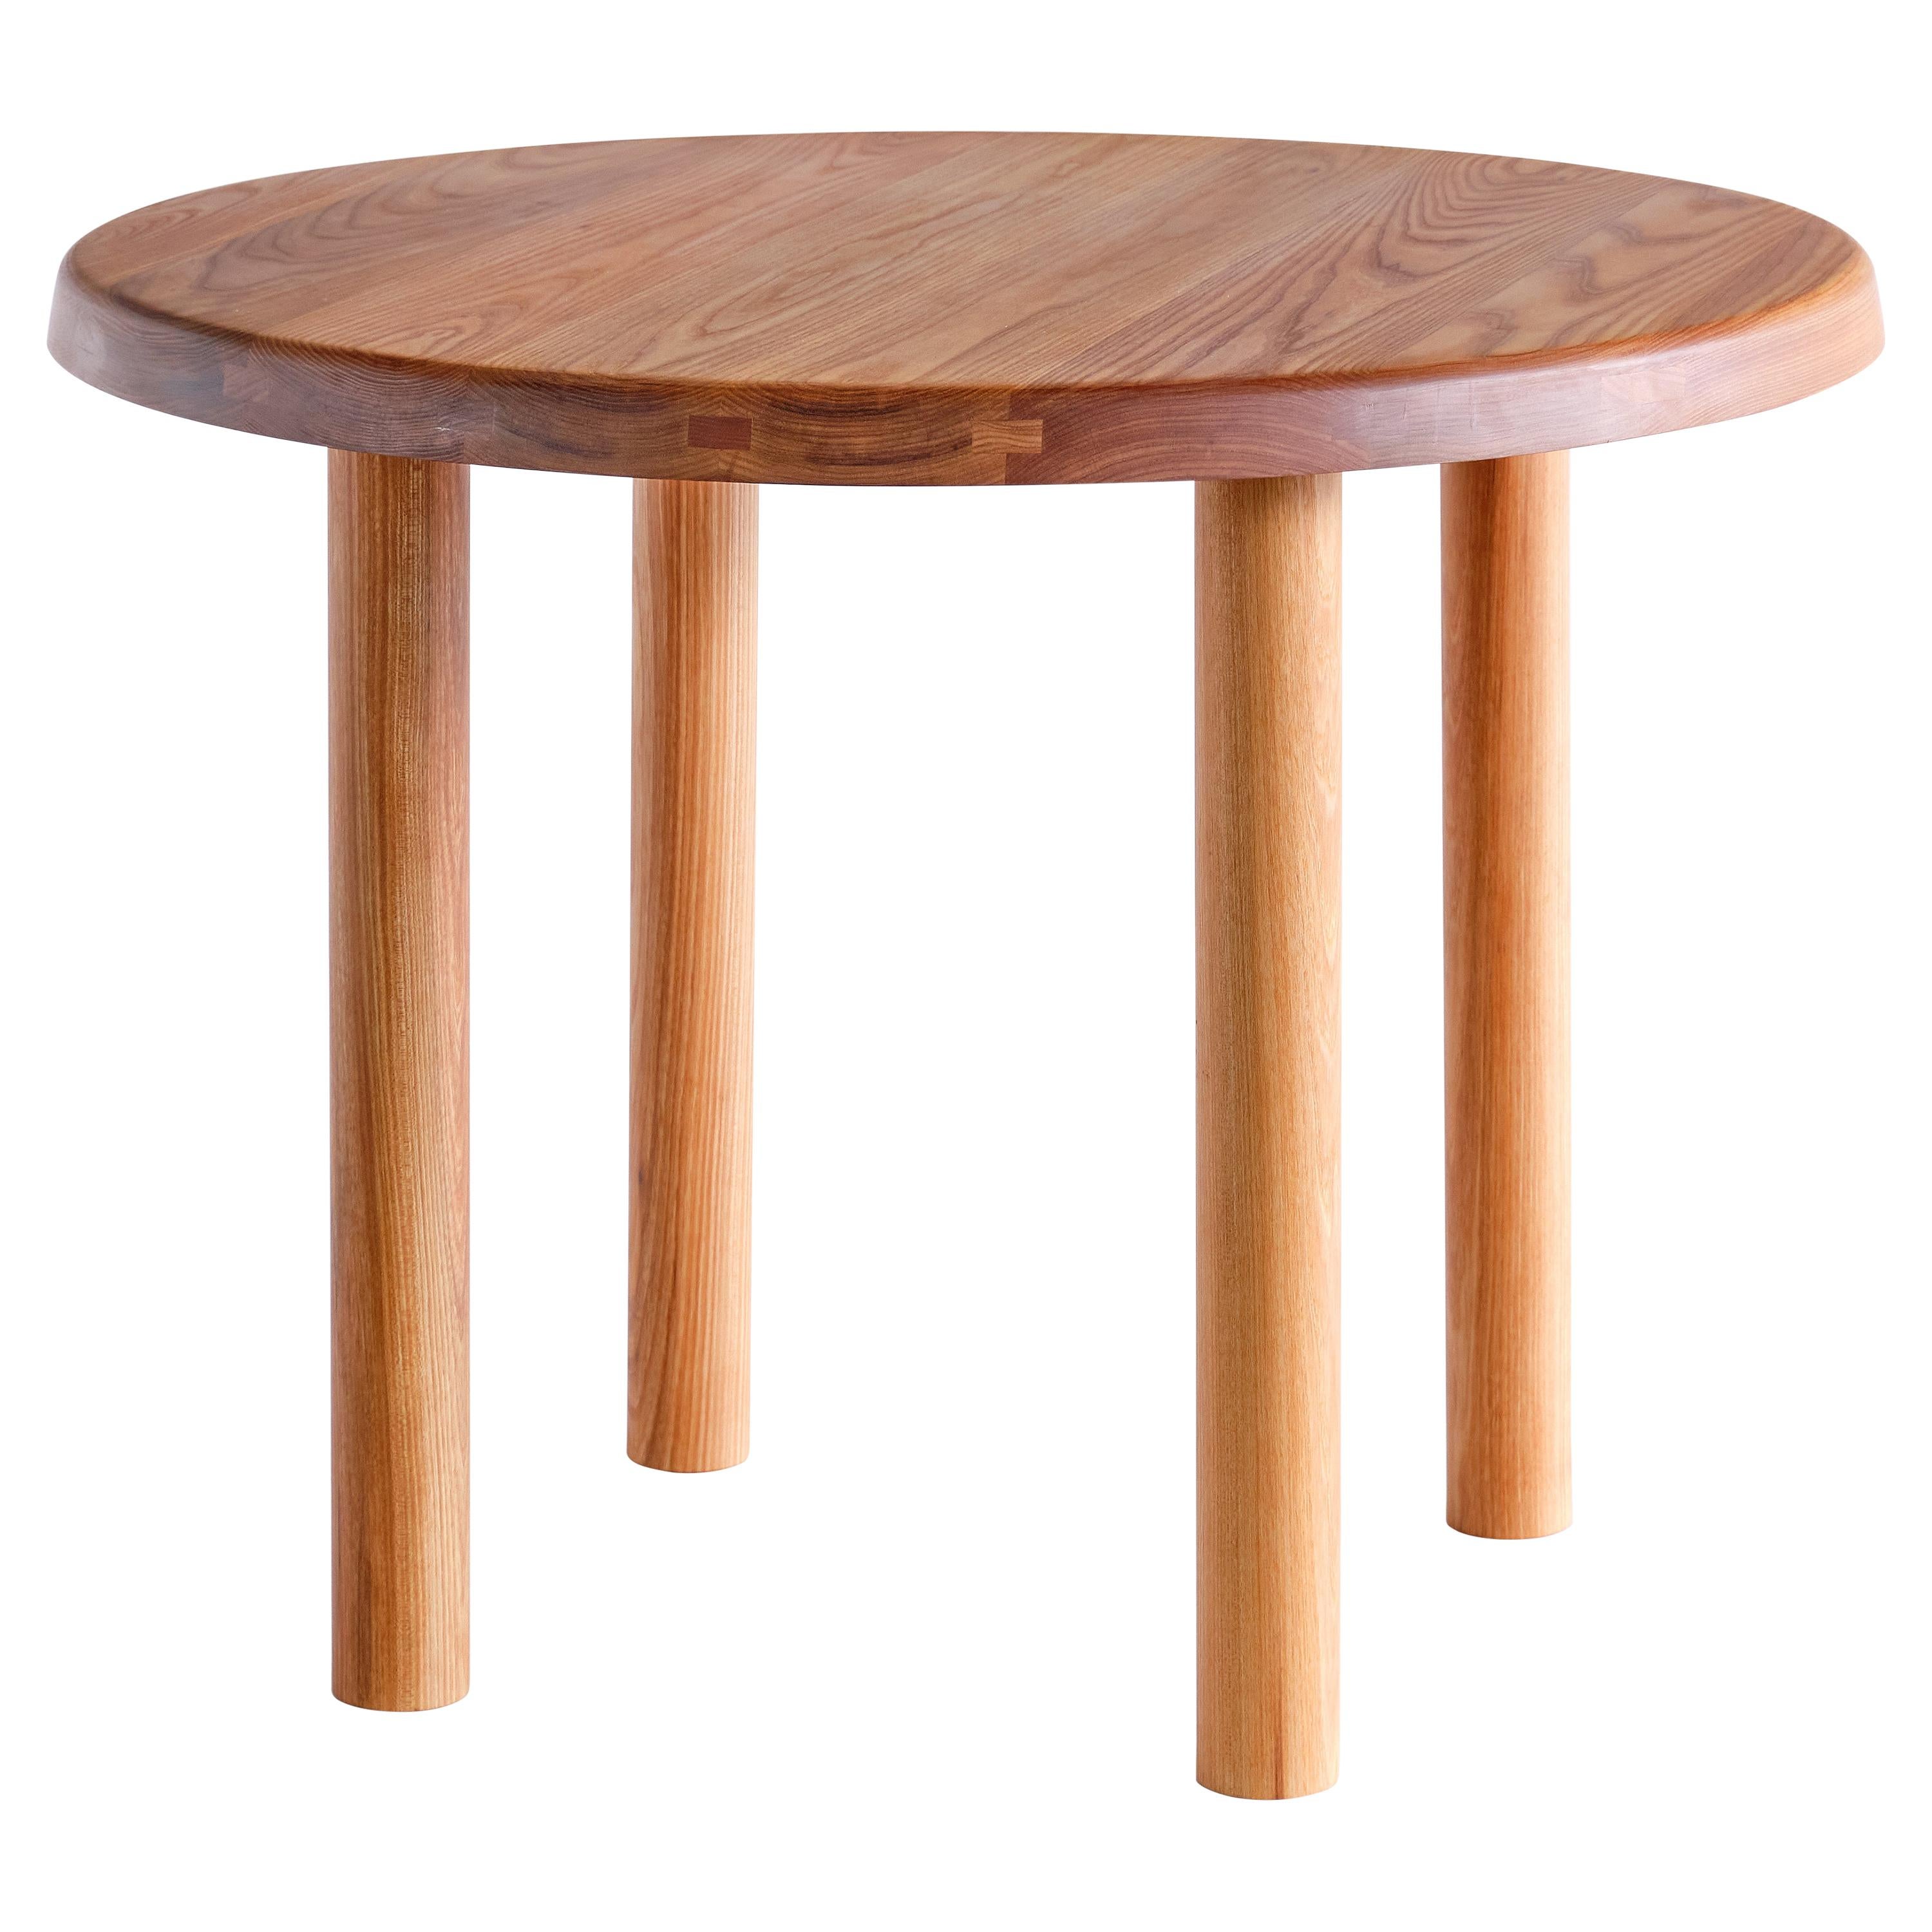 Pierre Chapo T02 Dining Table in Solid Elm, Chapo Creation, France